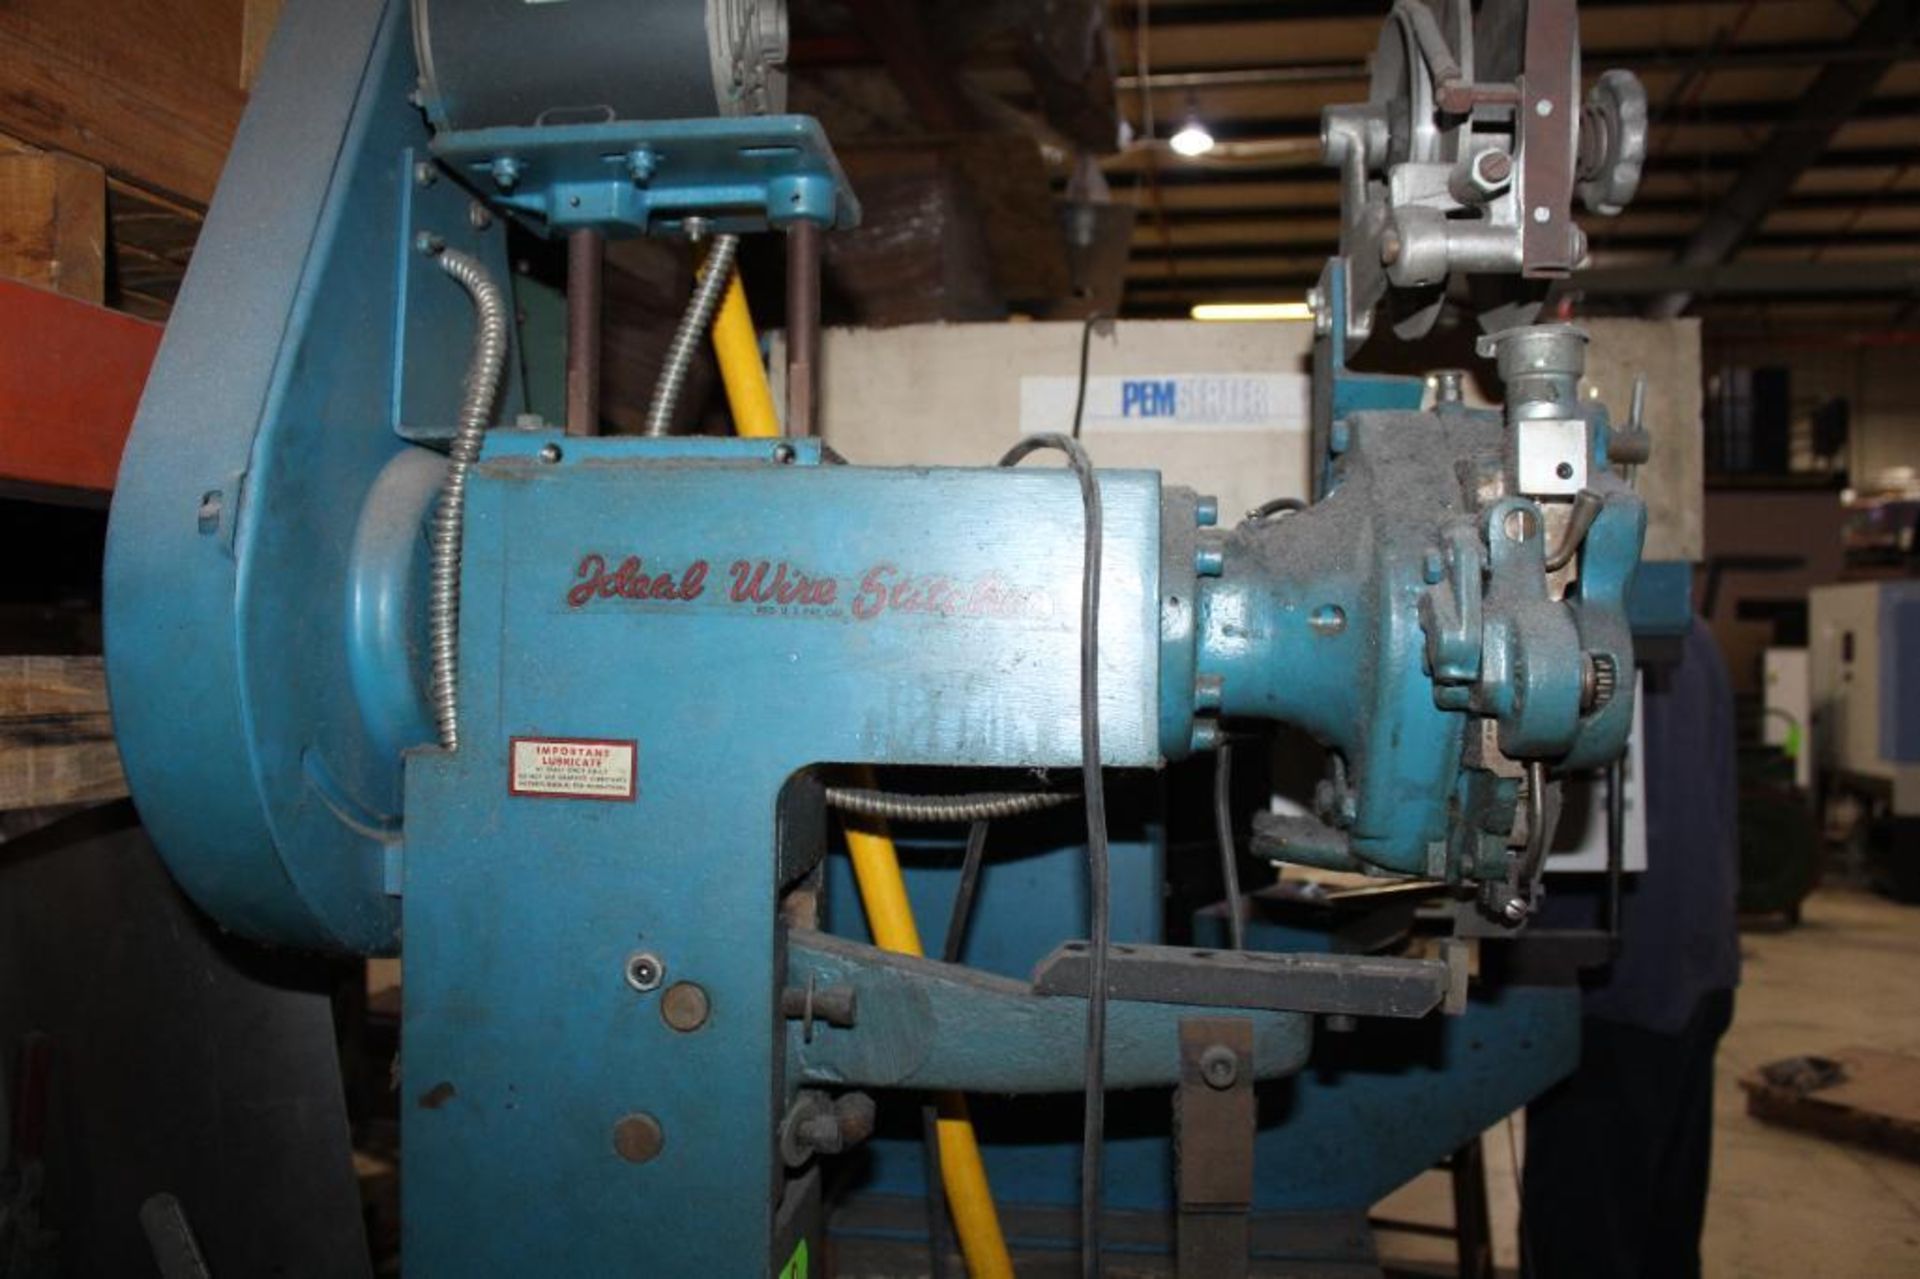 Ideal Wire Stitcher Model S-13-AW - Image 6 of 12